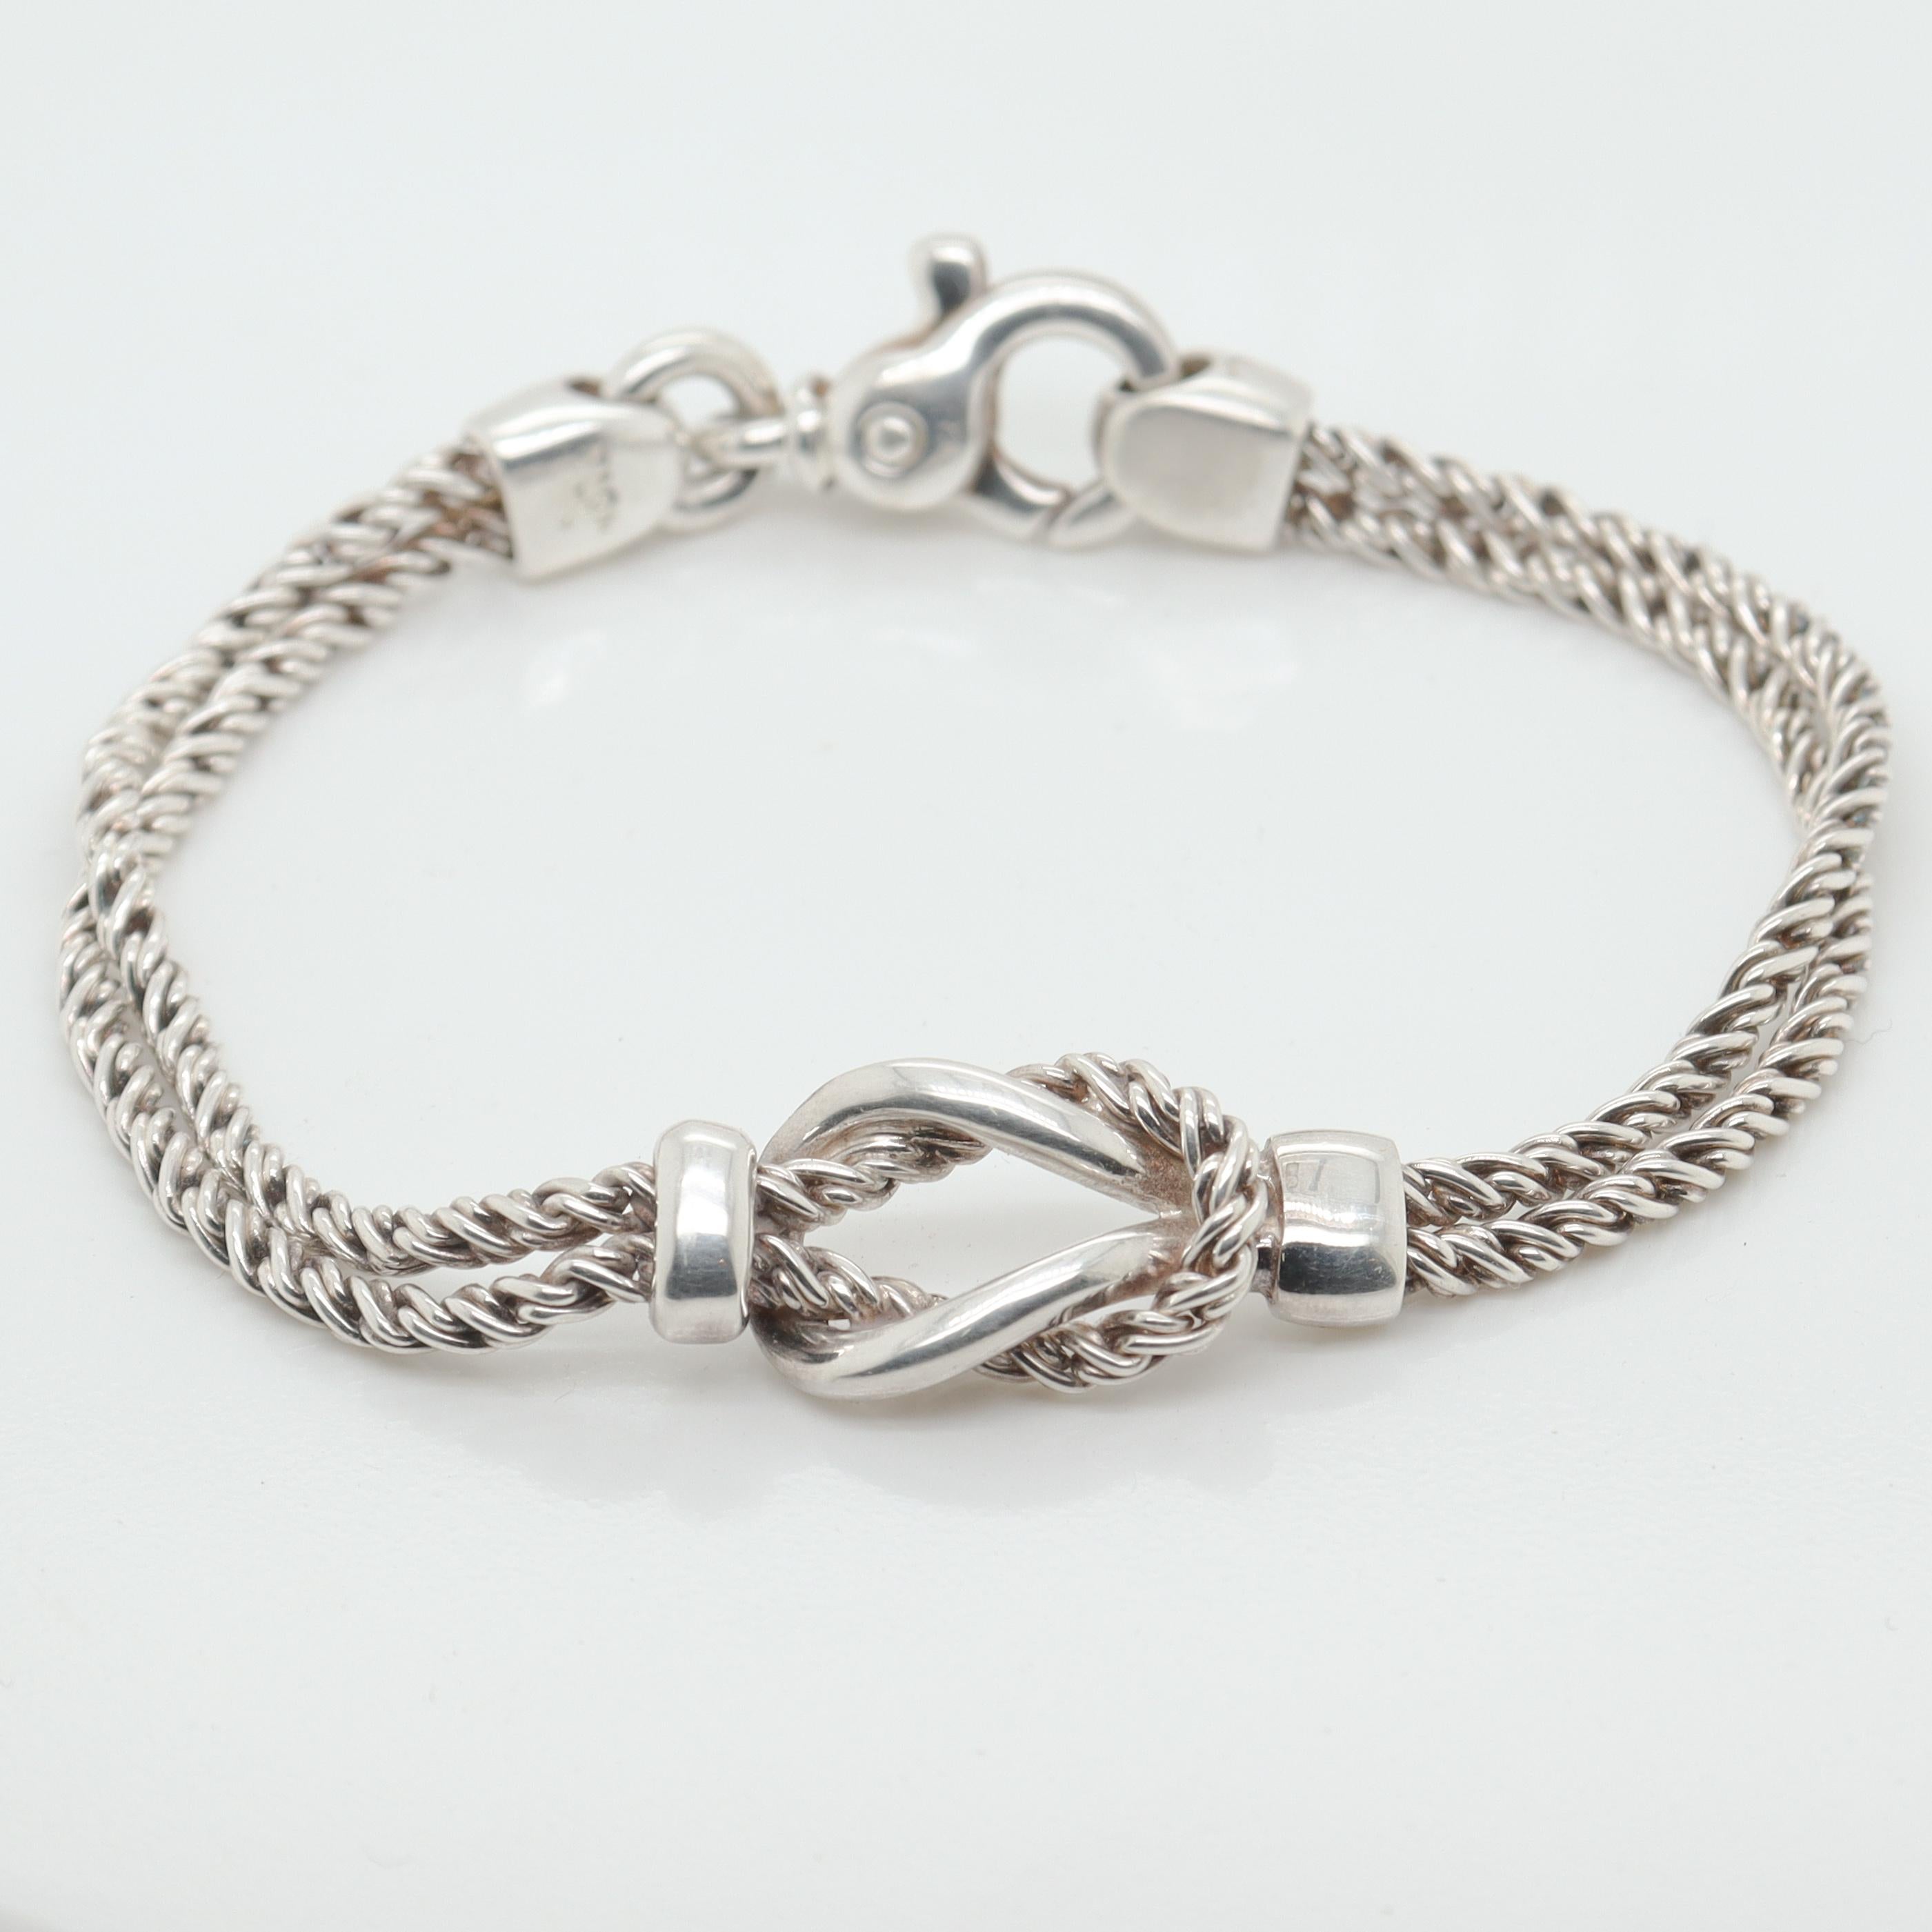 A fine love knot double rope chain bracelet.

By Tiffany & Co.

In sterling silver.

Comprised of two woven rope chains joined in a double loop love knot at the center of the bracelet.

Simply wonderful Tiffany design!

Date:
20th Century

Overall